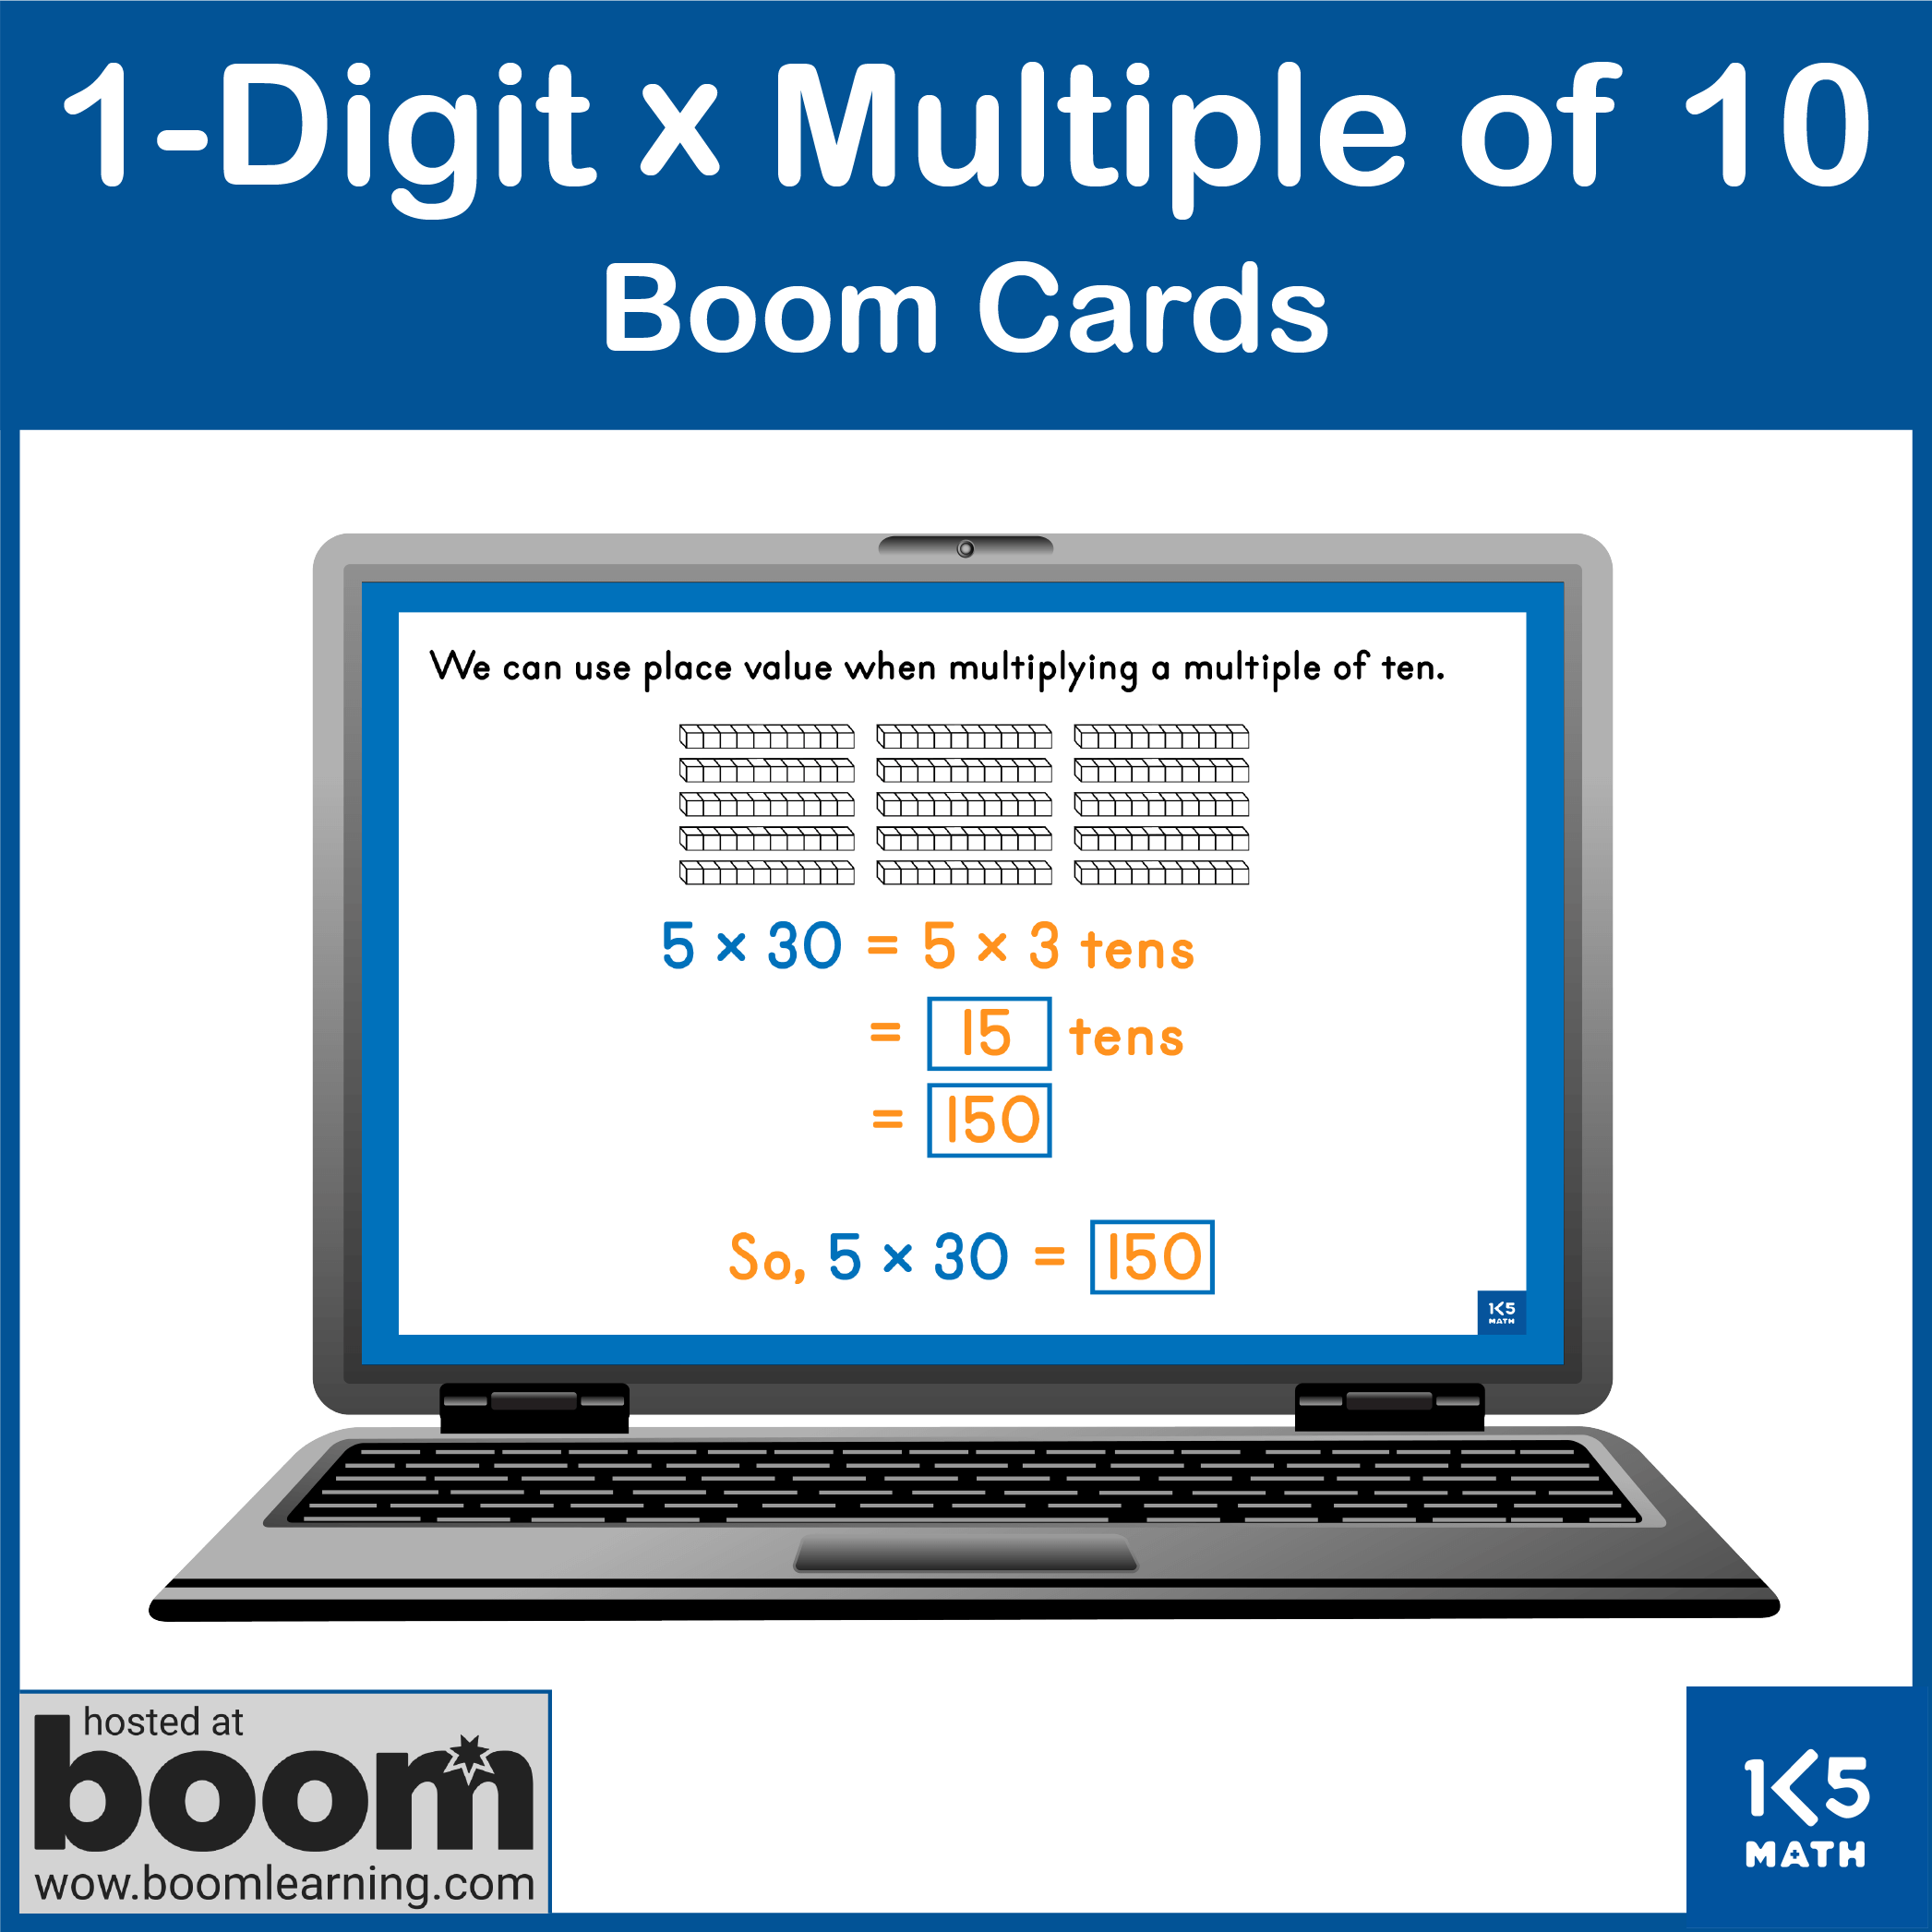 1-Digit x Multiple of 10 Boom Cards